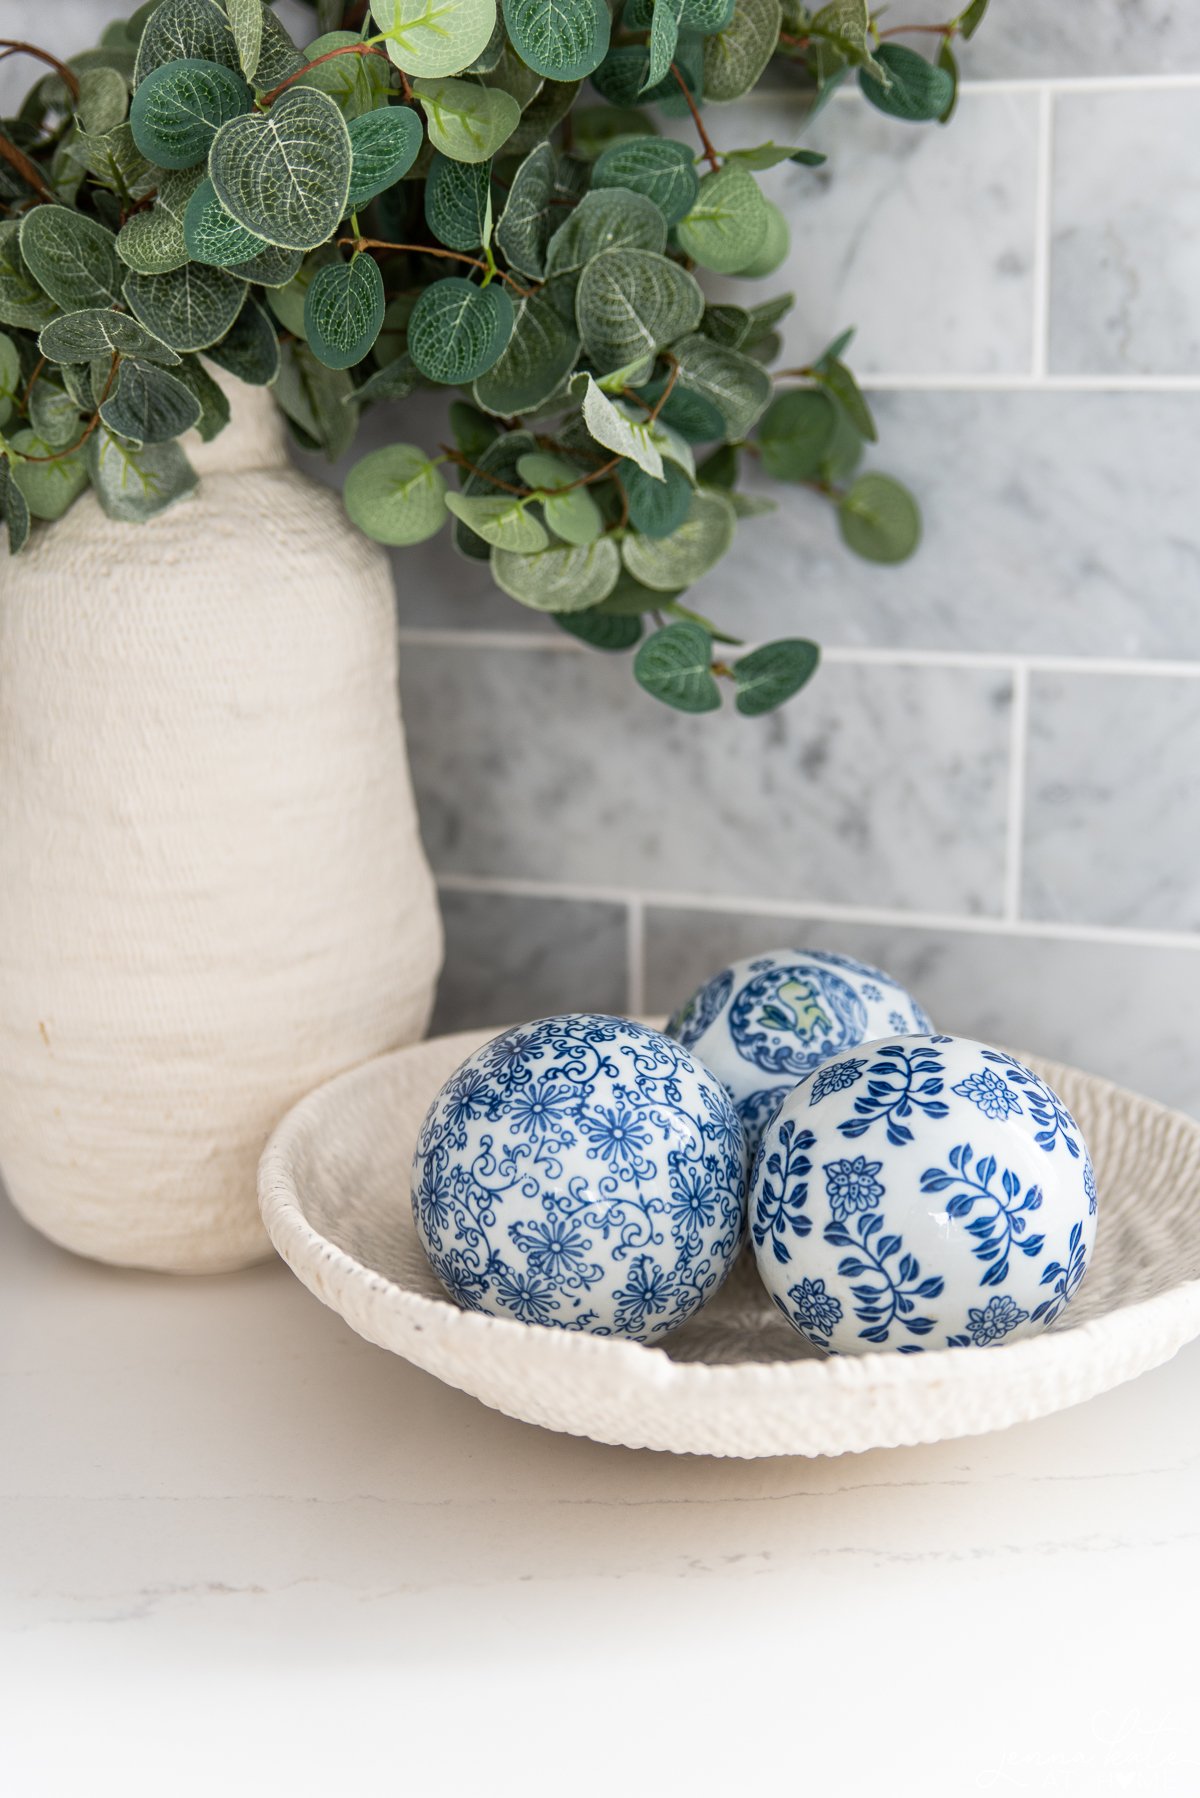 vase ceramic bowl filled with three blue and white decorative balls